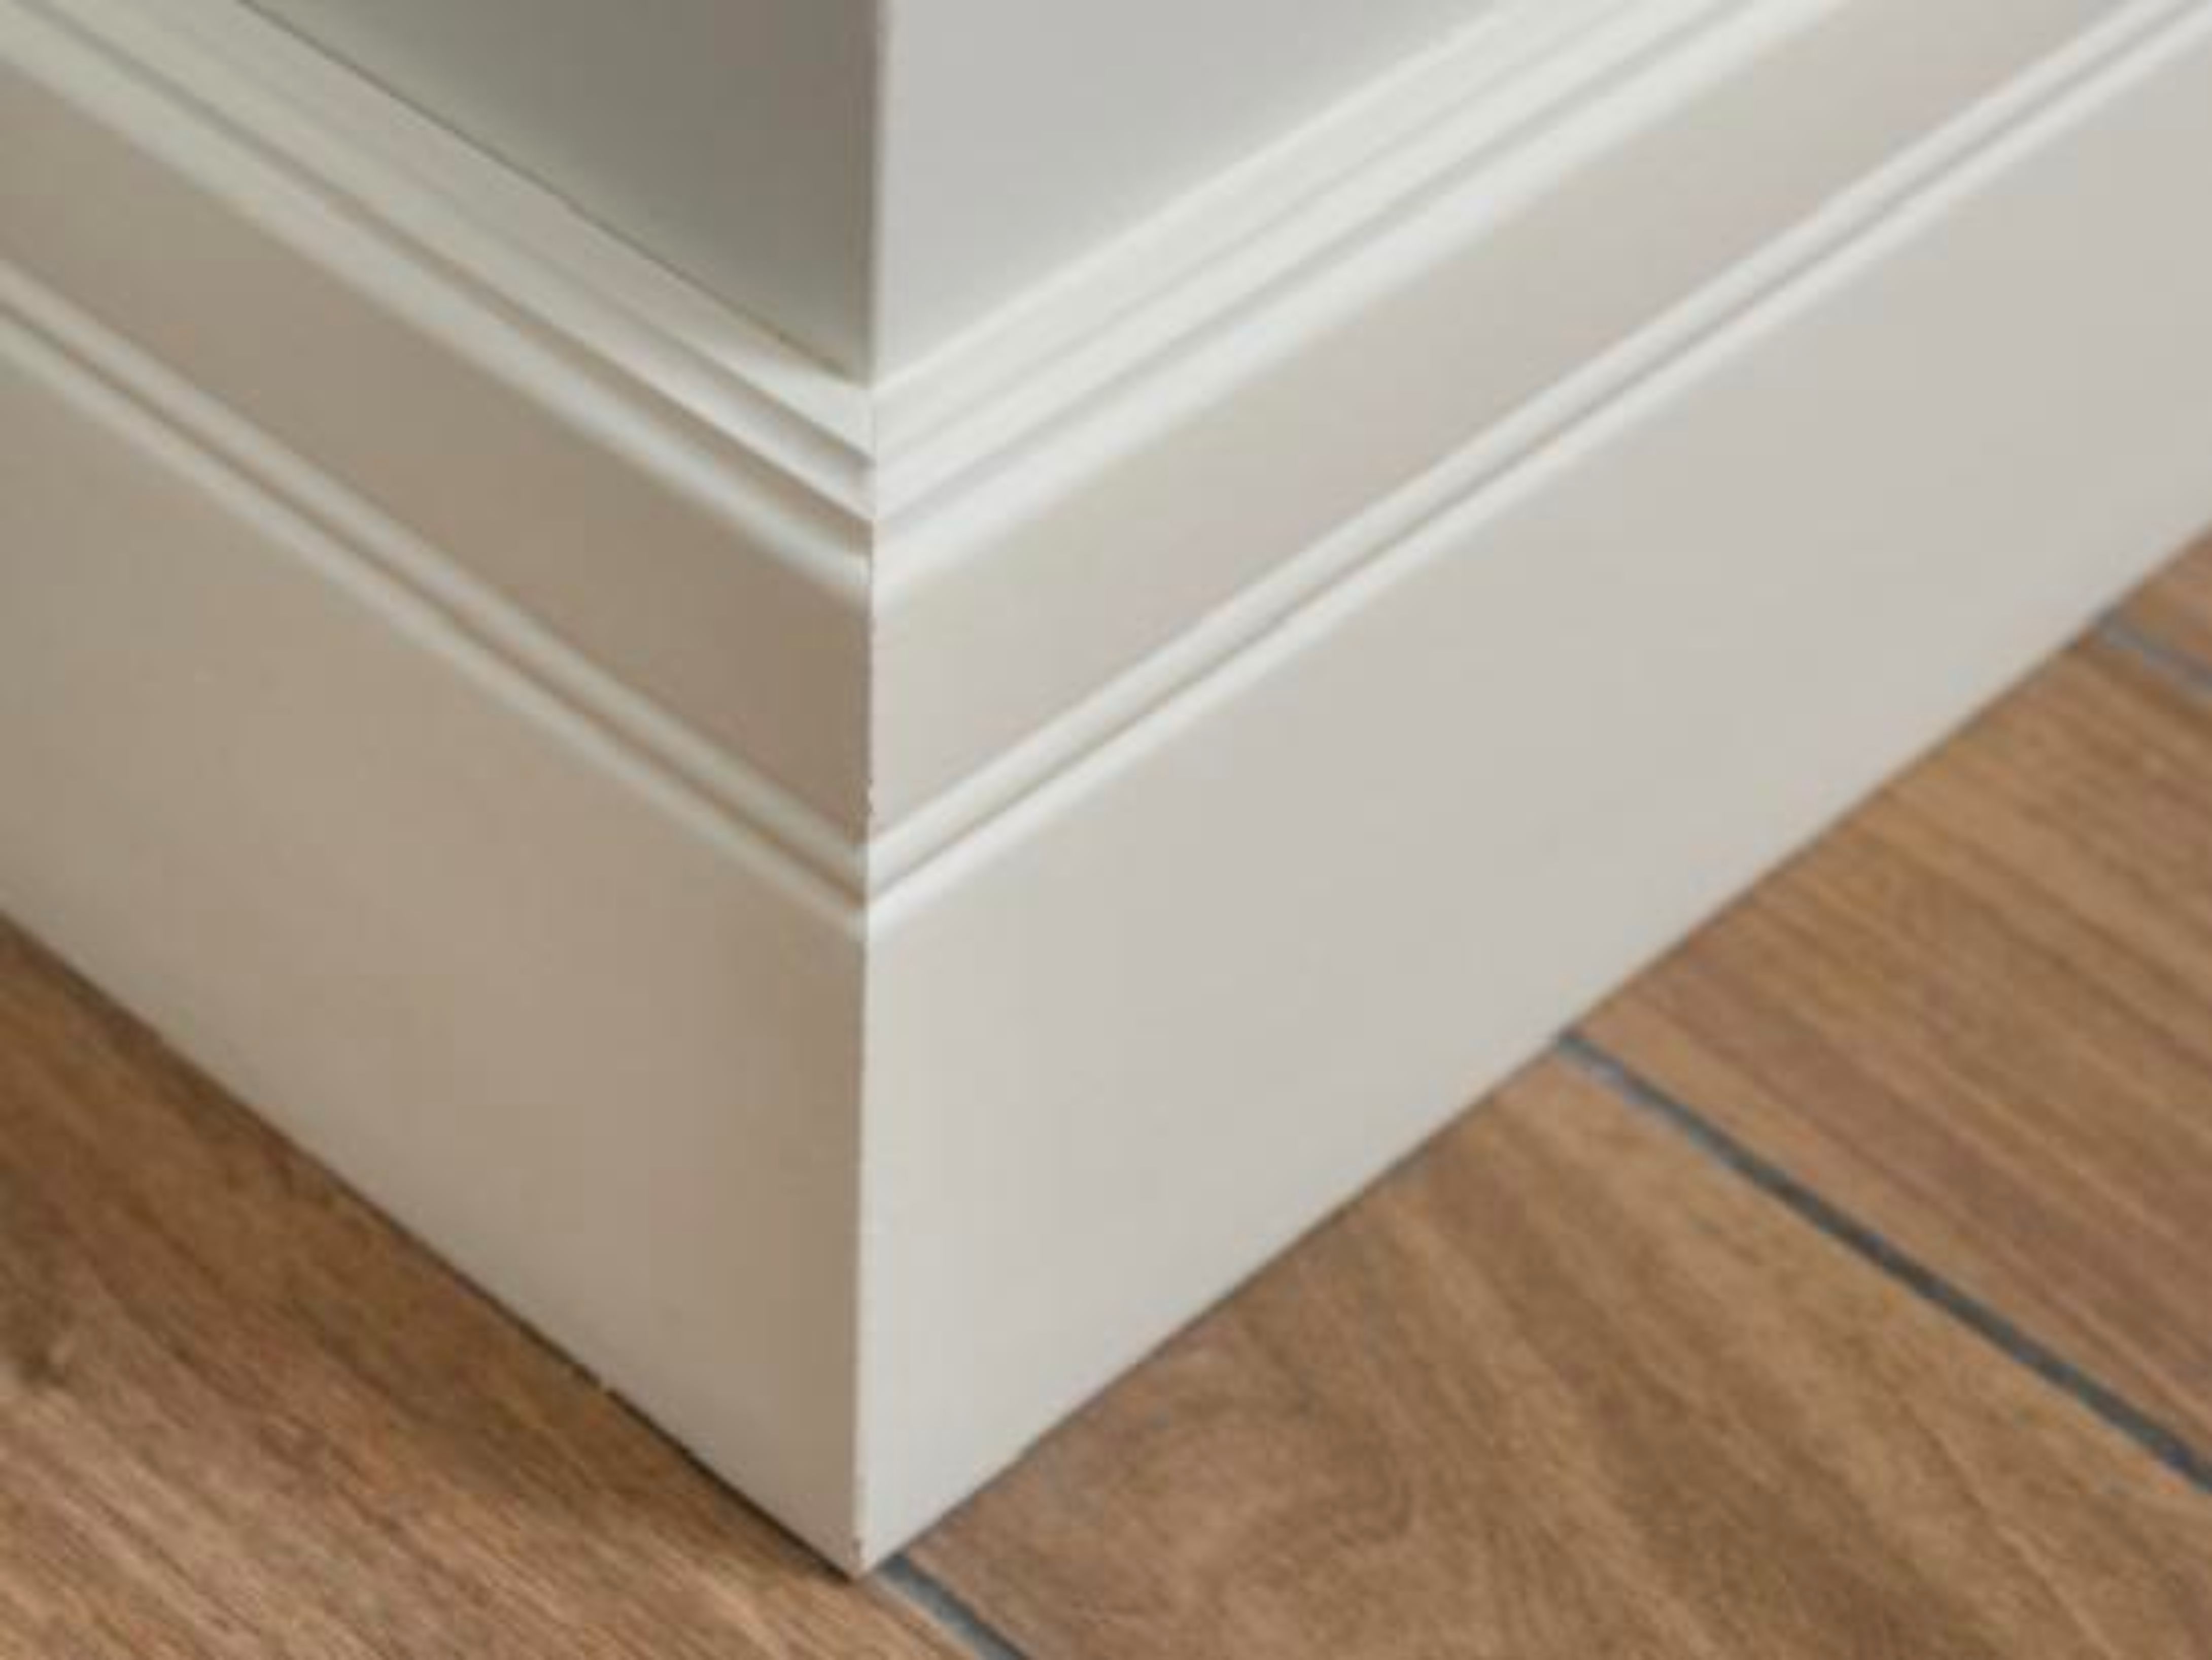 Skirting boards: our round-up of the best products on the market